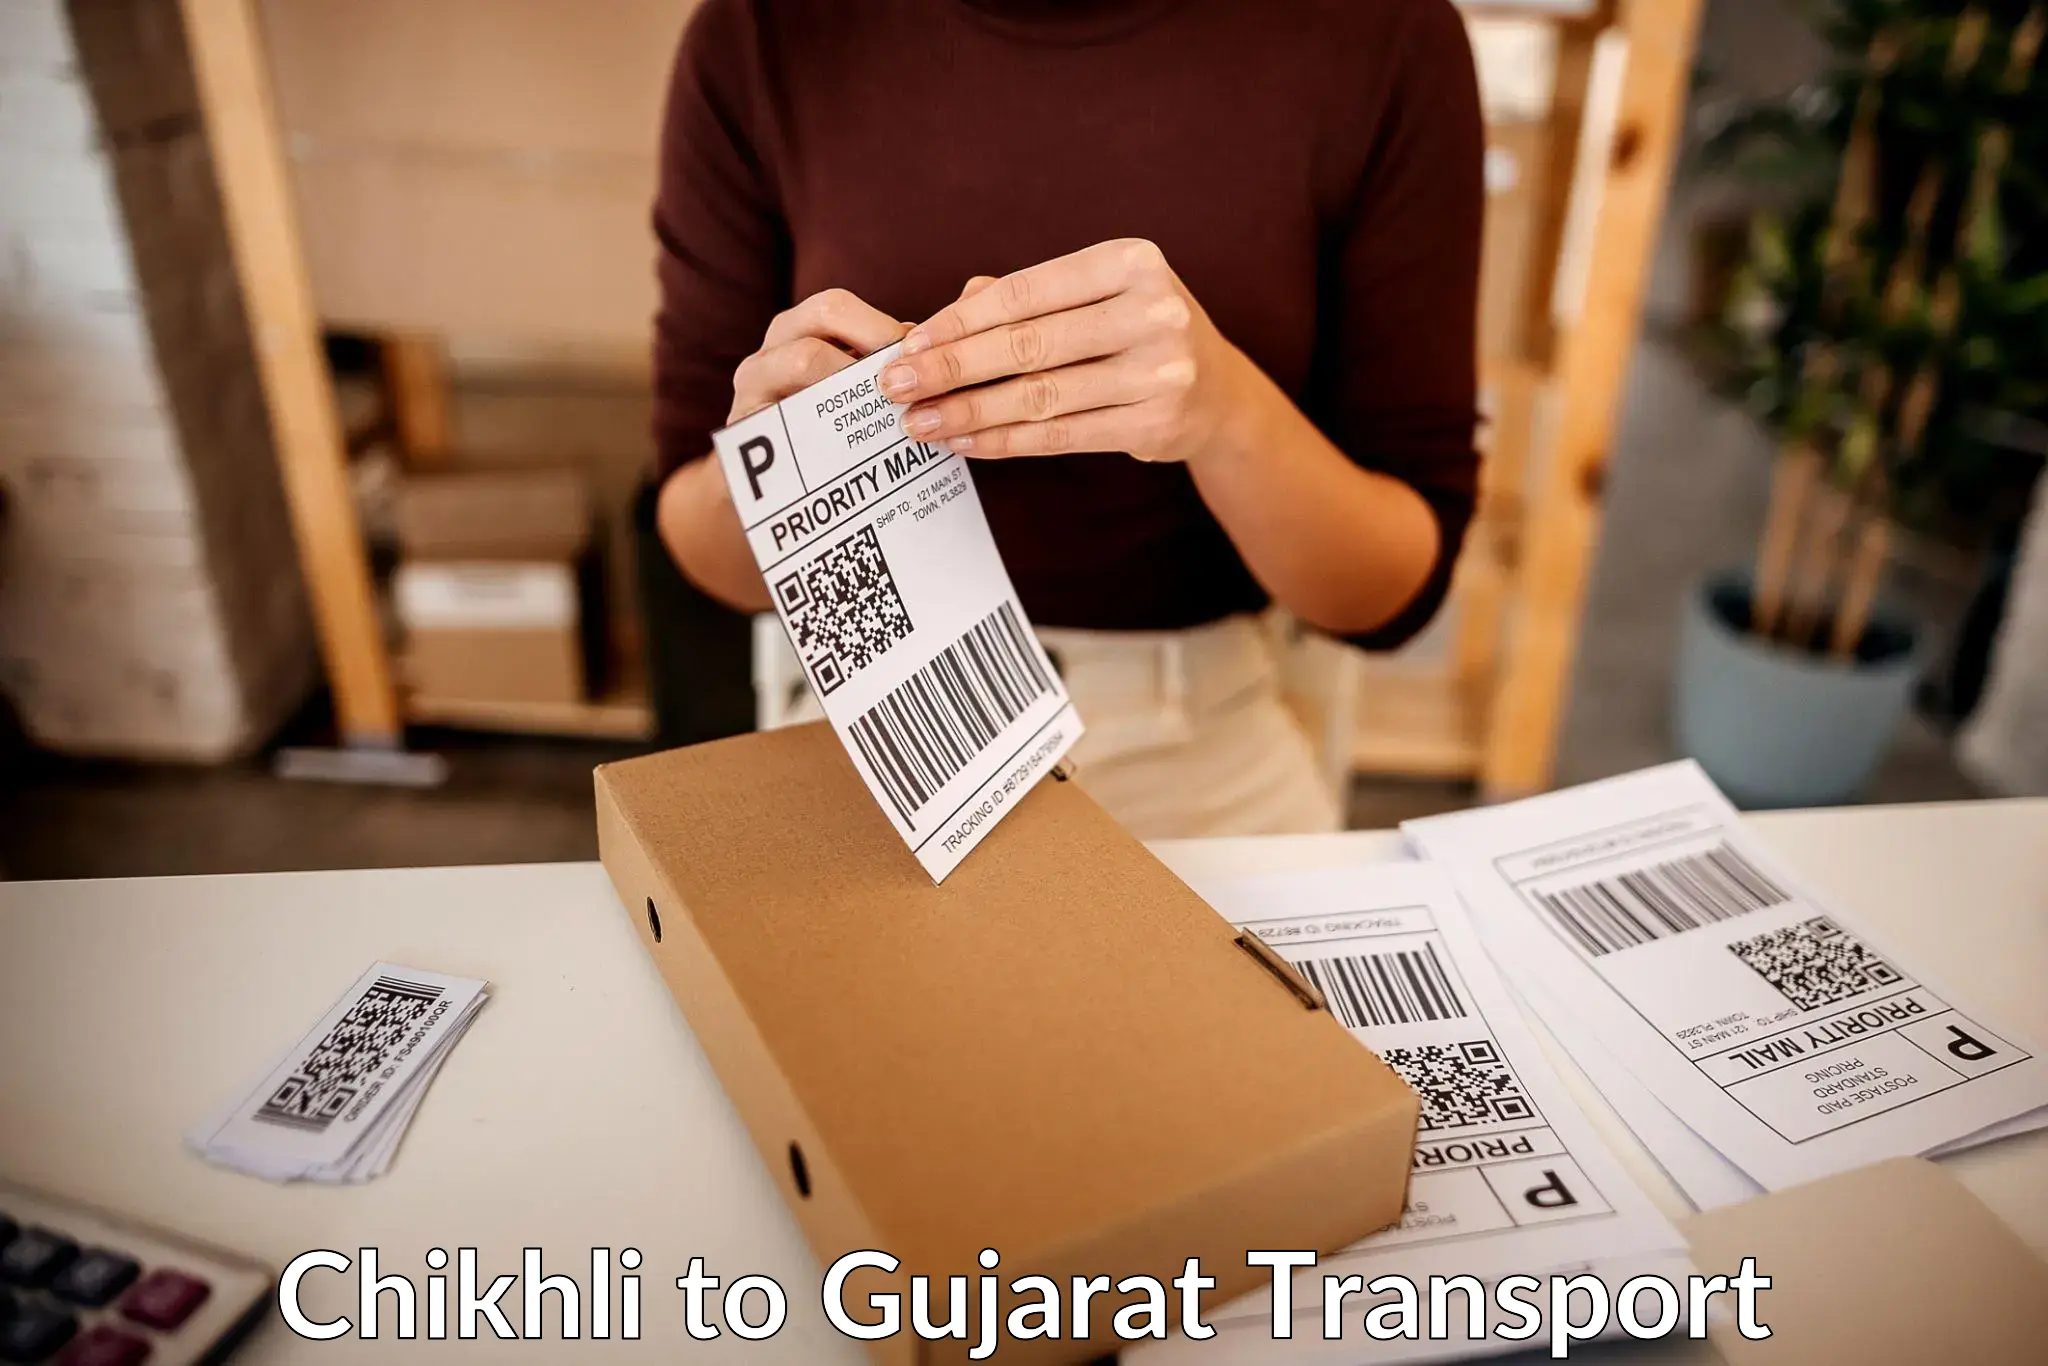 Two wheeler transport services Chikhli to Mehsana